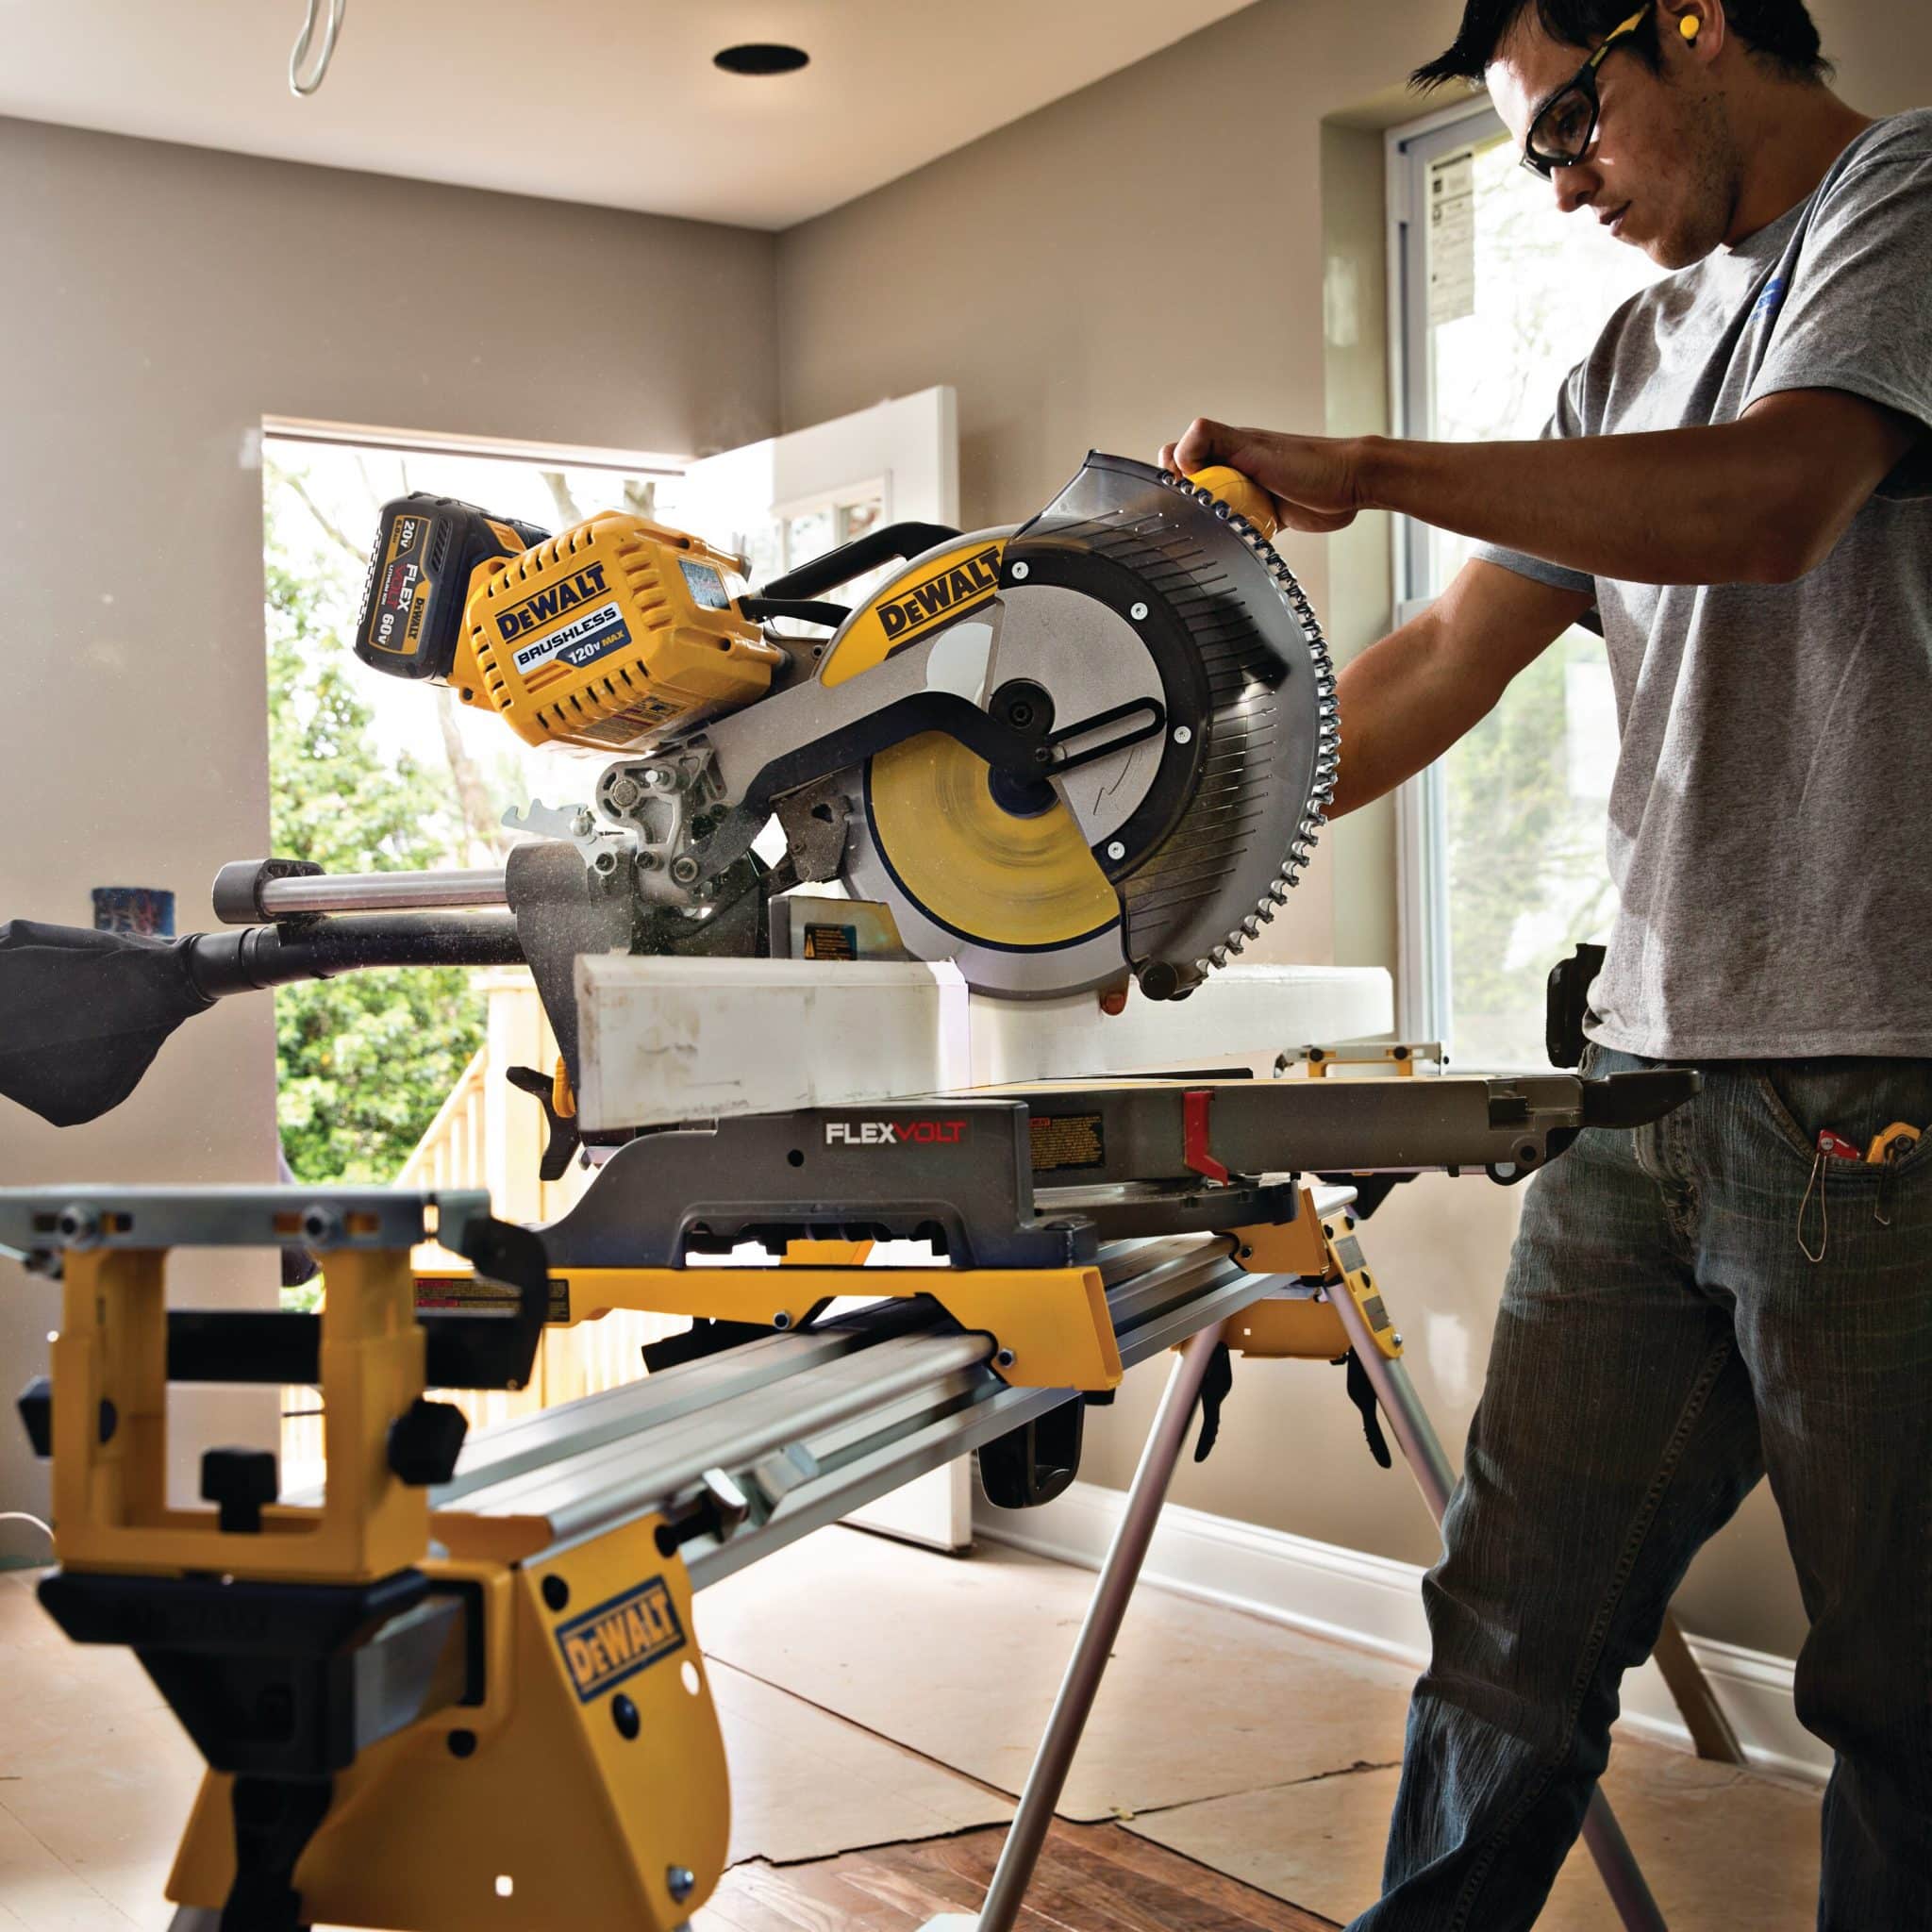 DHS790AT2 scaled - 11 Best Miter Saws in 2022: Detailed Reviews & Buyer’s Guide - HandyMan.Guide - Miter Saw